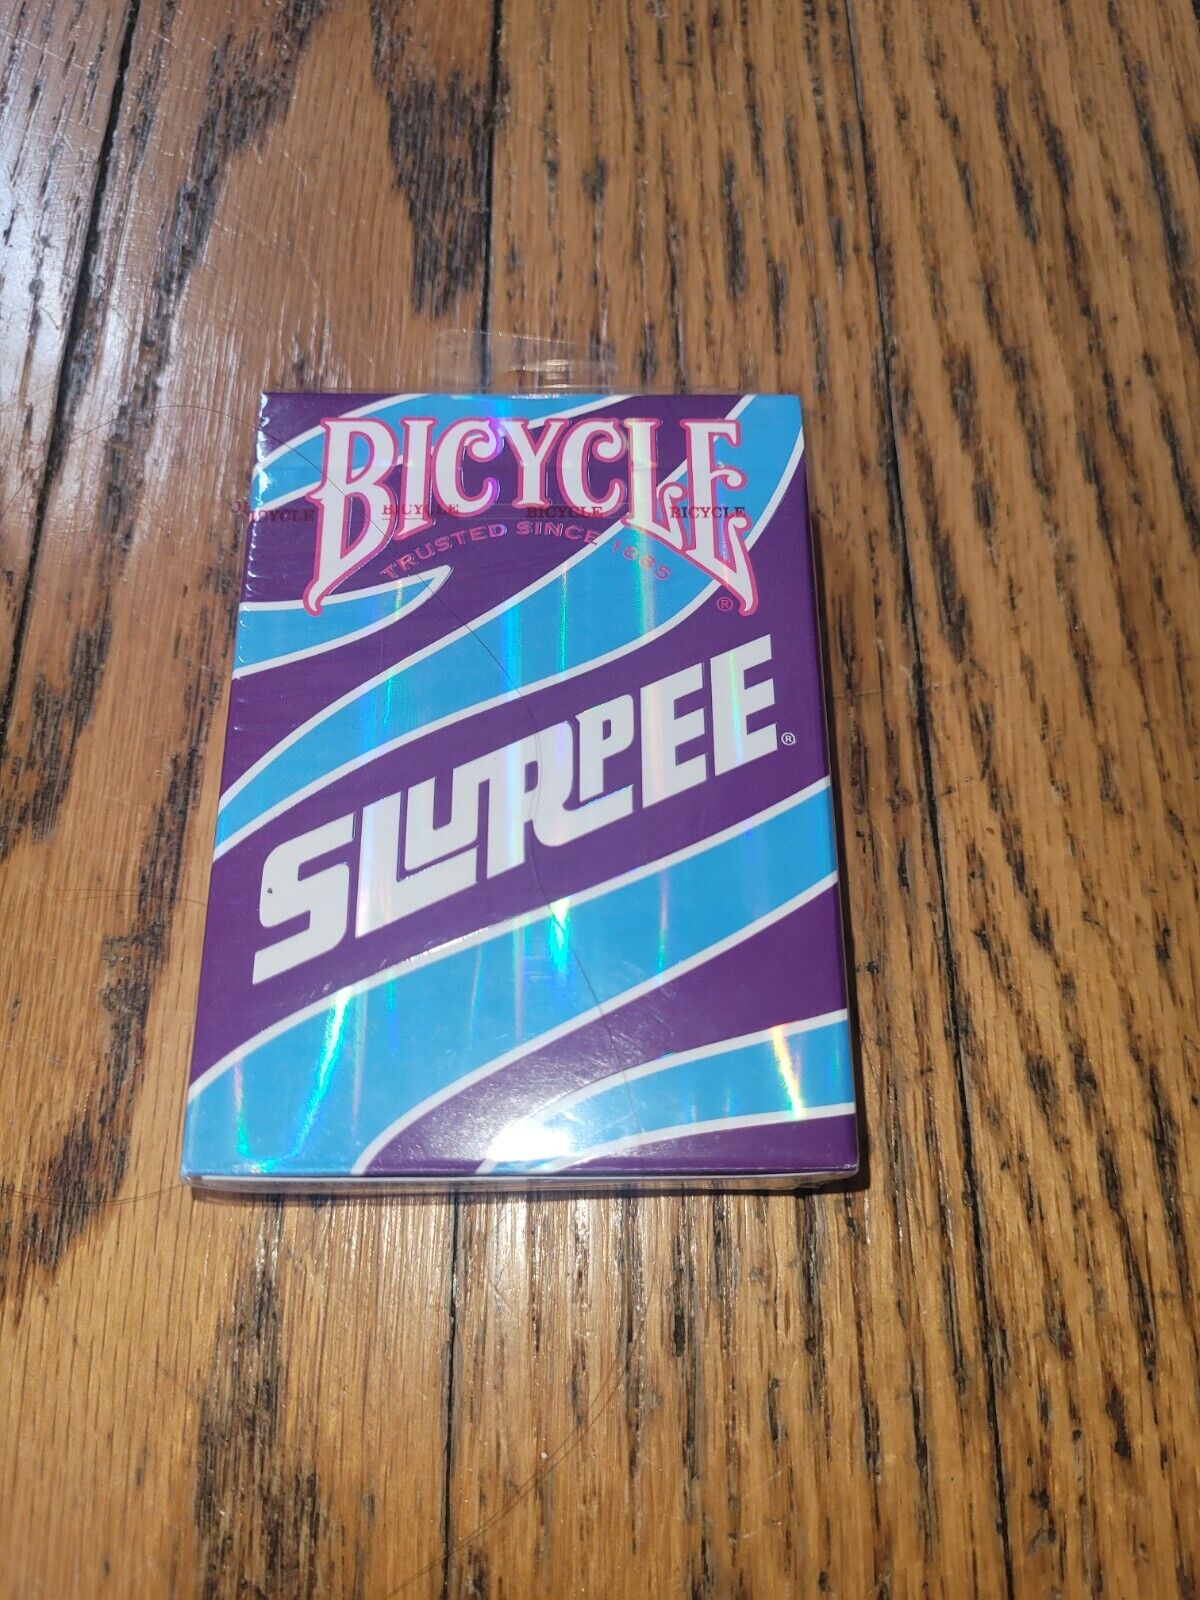 BICYCLE SLURPEE PLAYING CARDS 2022 COLLECTORS EDITION NEW POKER CARD SET